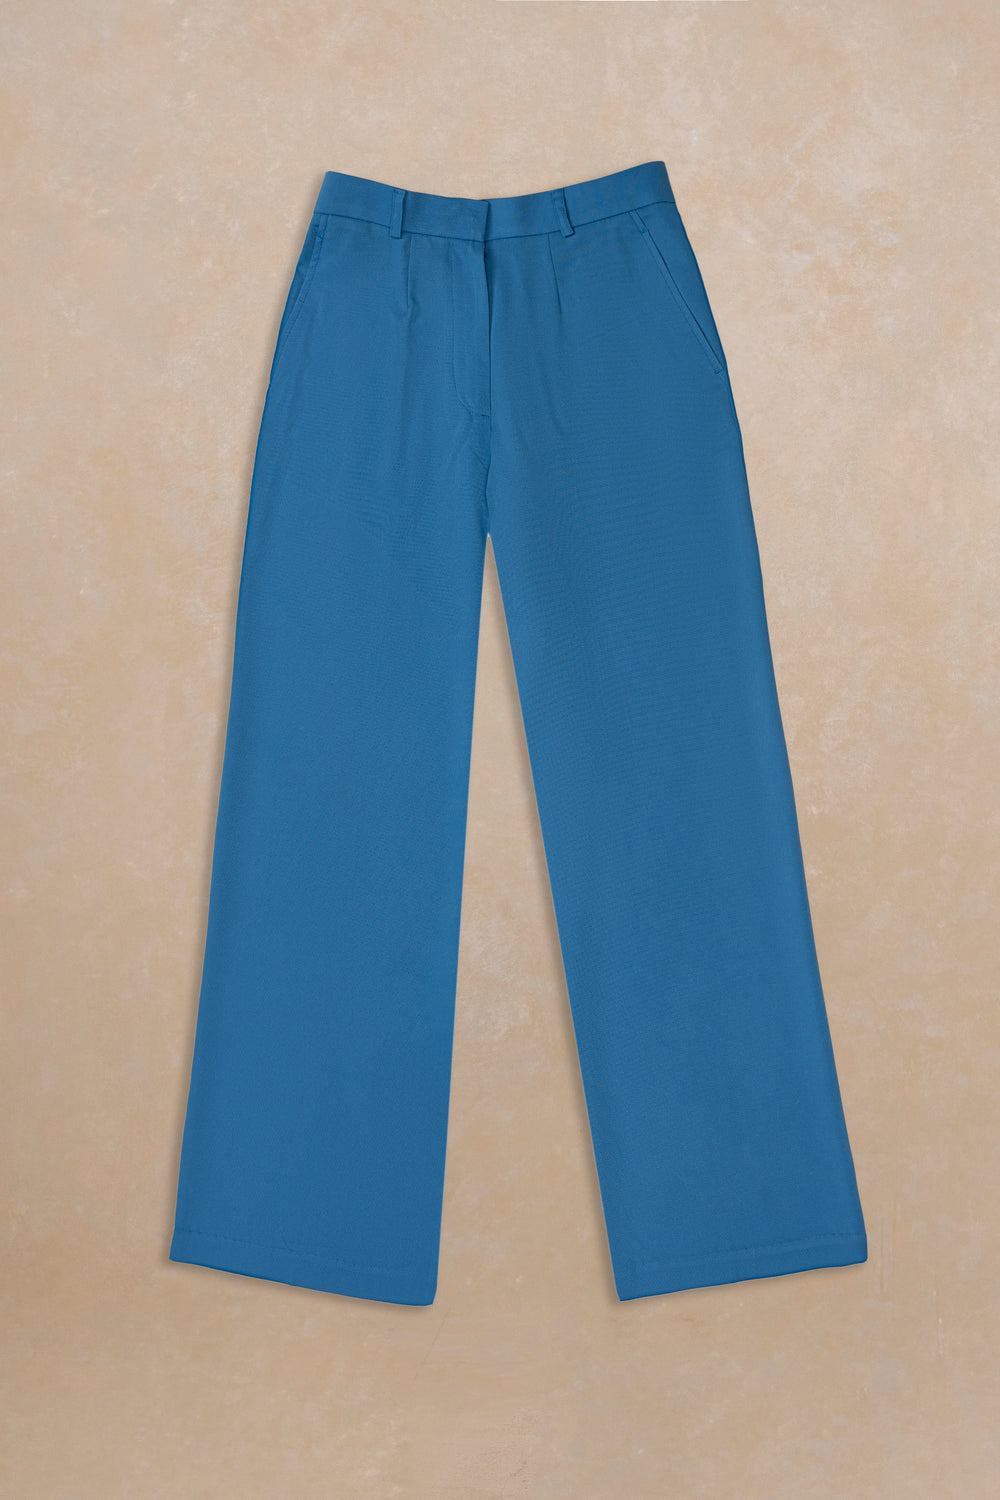 Blue Palazzo Pants for women